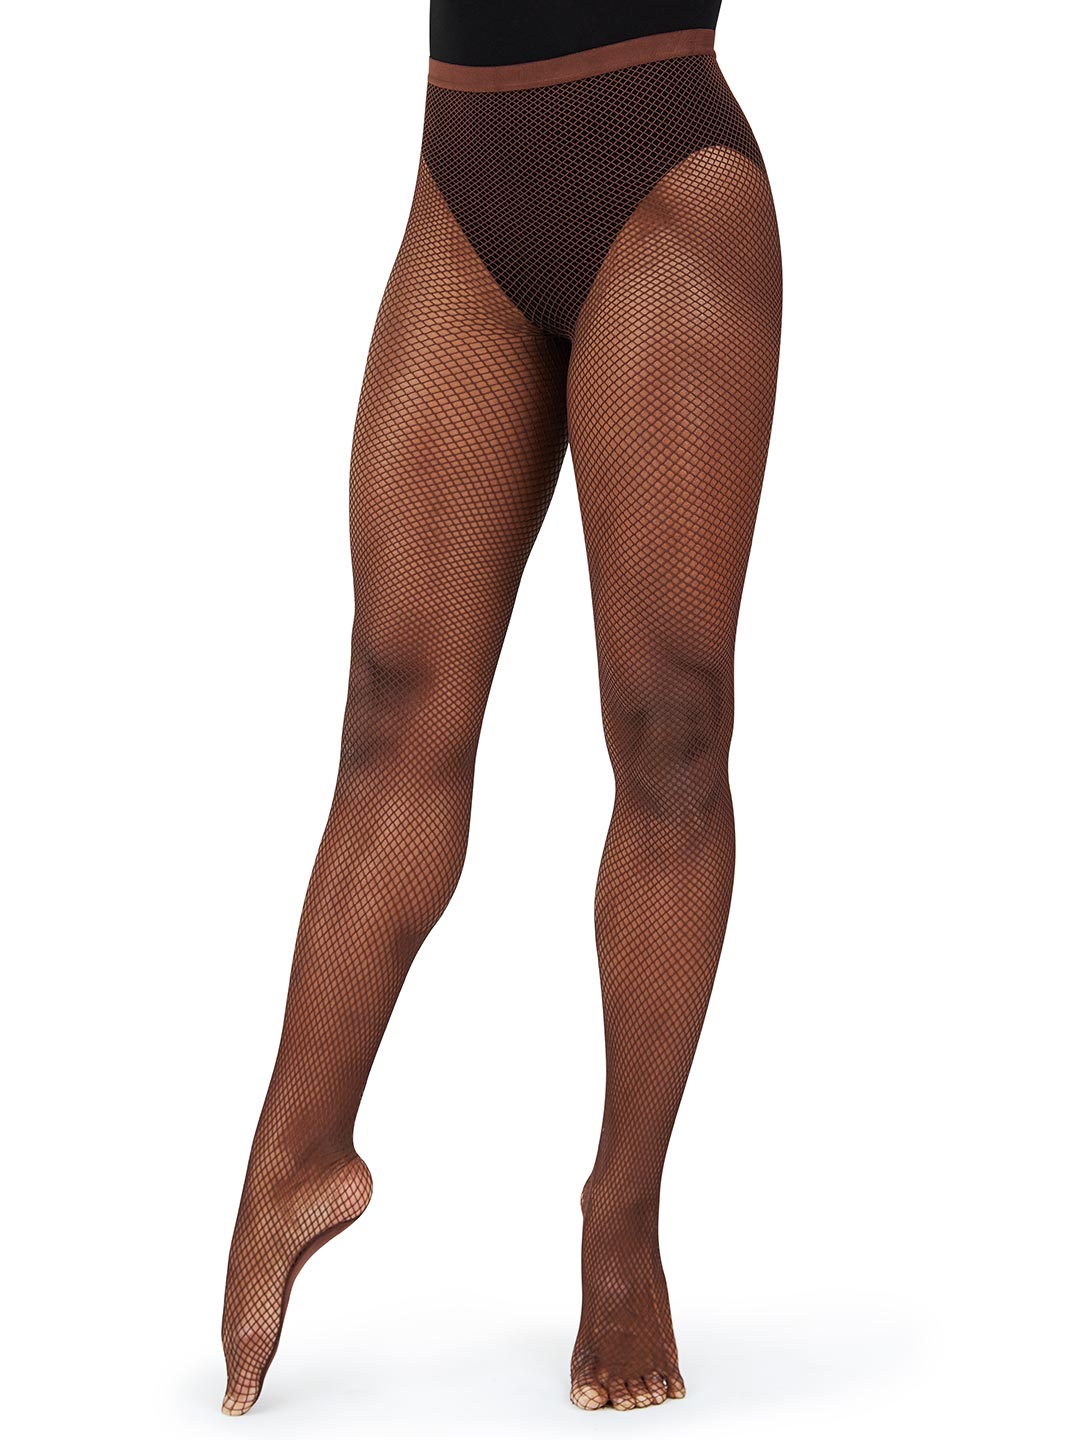 Professional Seamless Fishnet Tight 3000 (6 Pack)